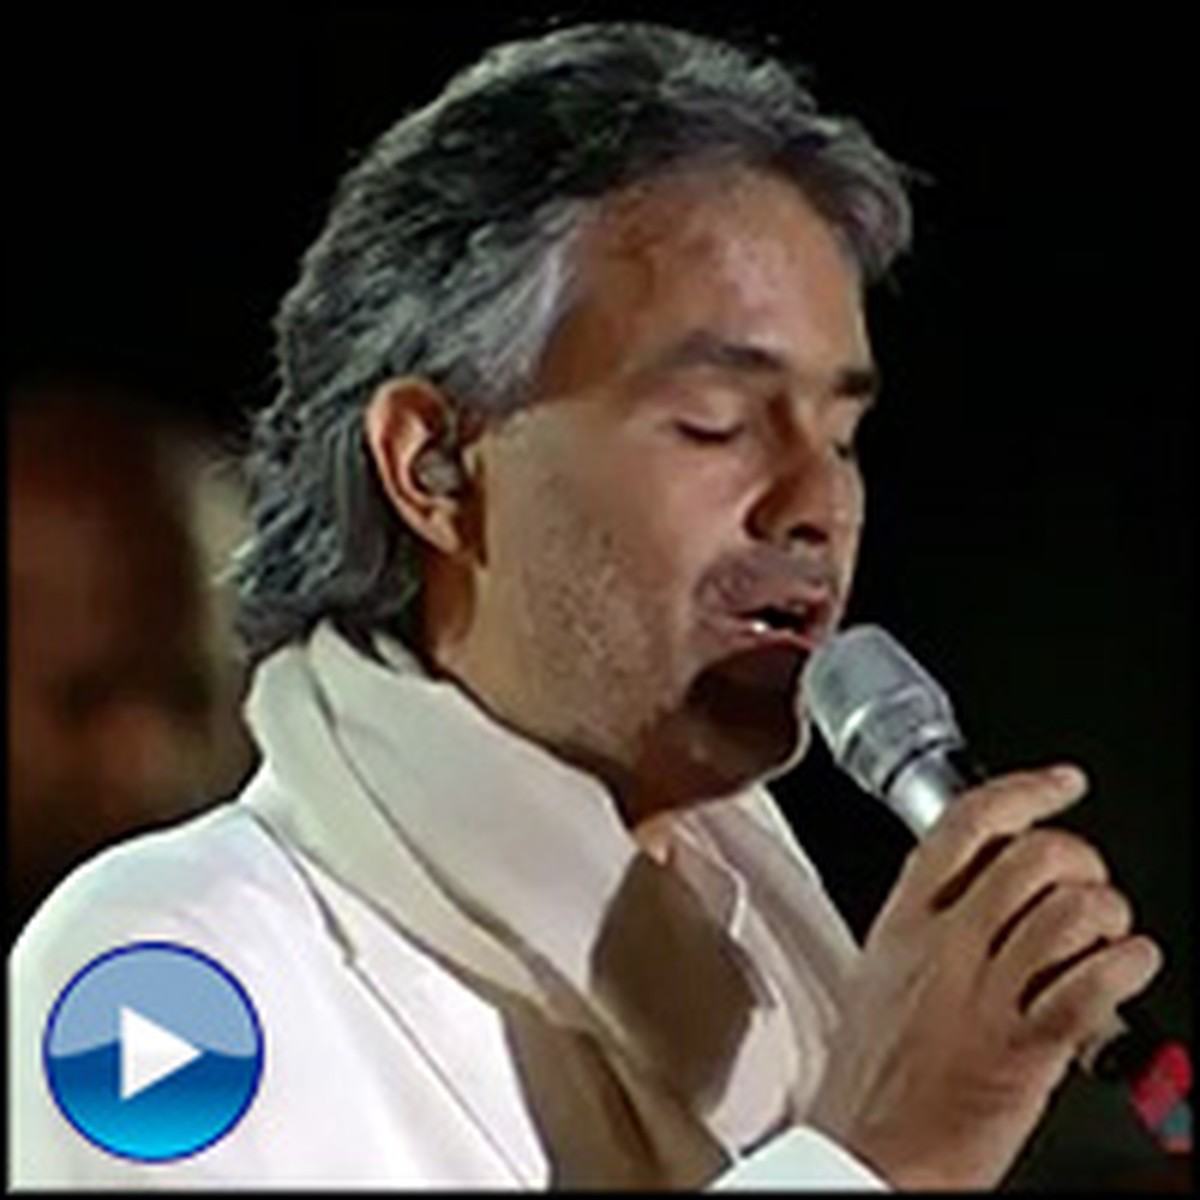 This Angelic Performance by Andrea Bocelli Will Inspire You!